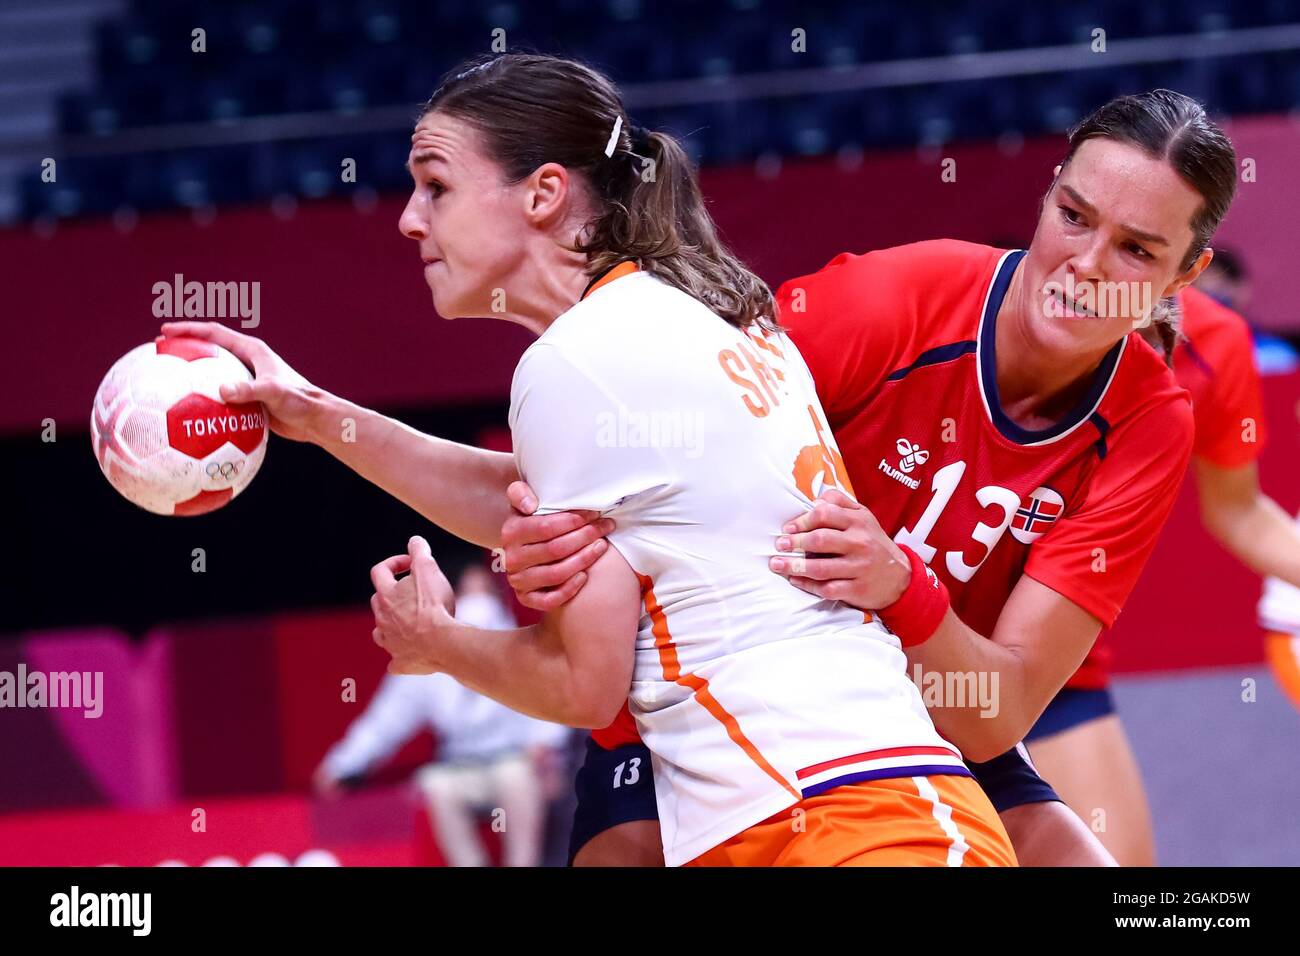 Onvoorziene omstandigheden Dominant Koreaans TOKYO, JAPAN - JULY 31: Inger Smits of the Netherlands and Kari Brattset  Dale of Norway during the Tokyo 2020 Olympic Womens Handball Tournament  match between Norway and Netherlands at Yoyogi National